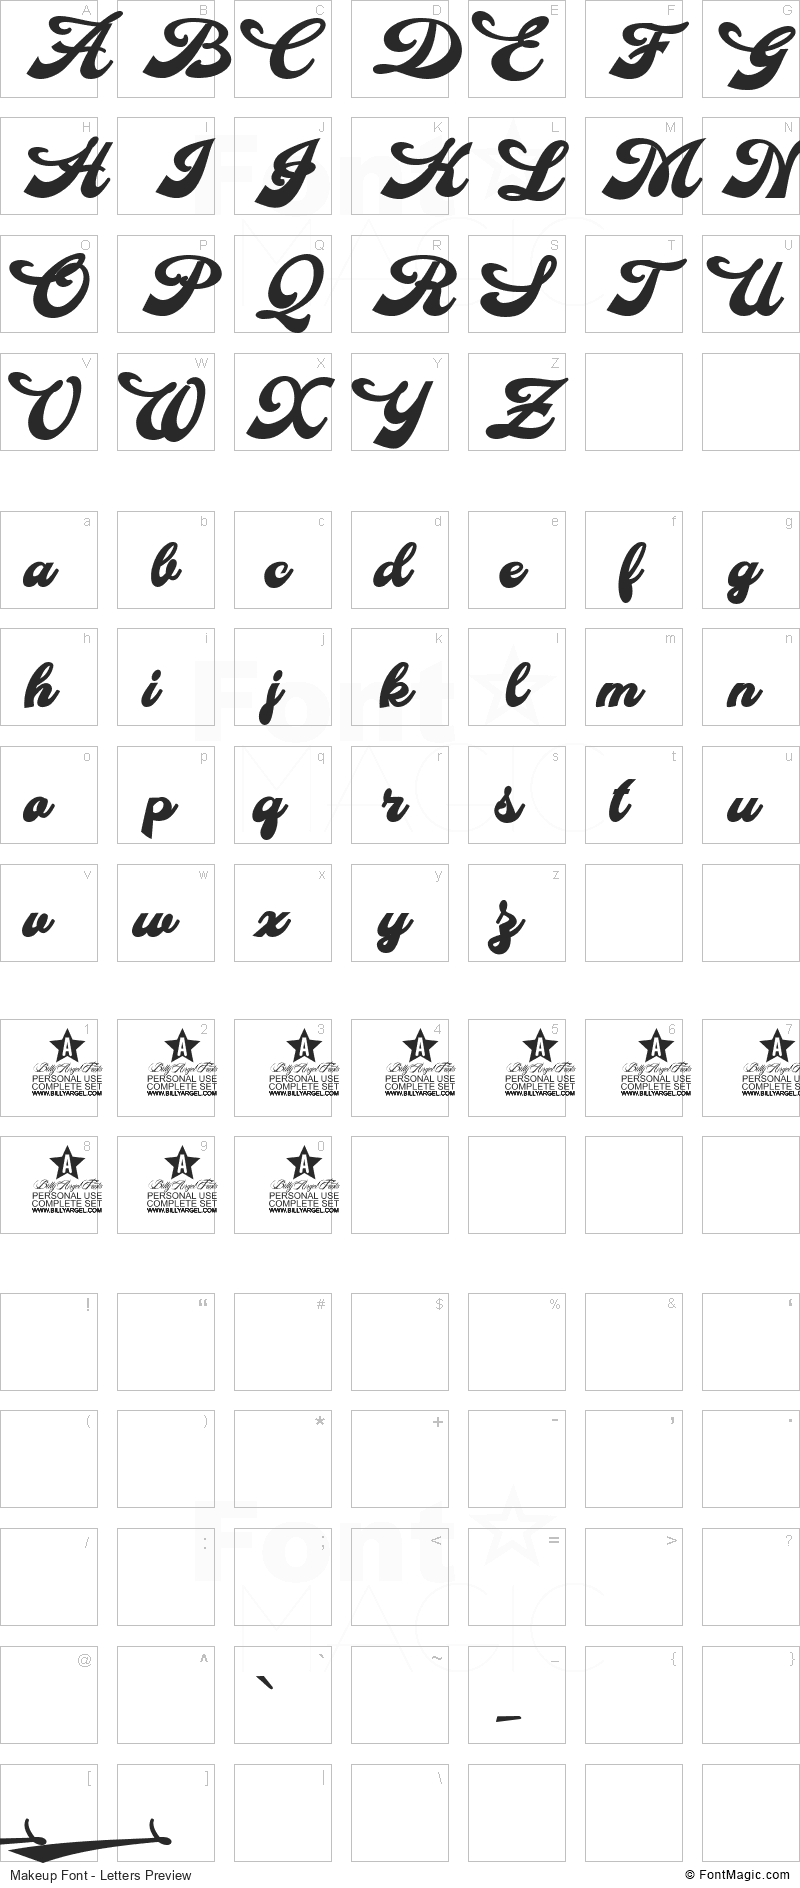 Makeup Font - All Latters Preview Chart